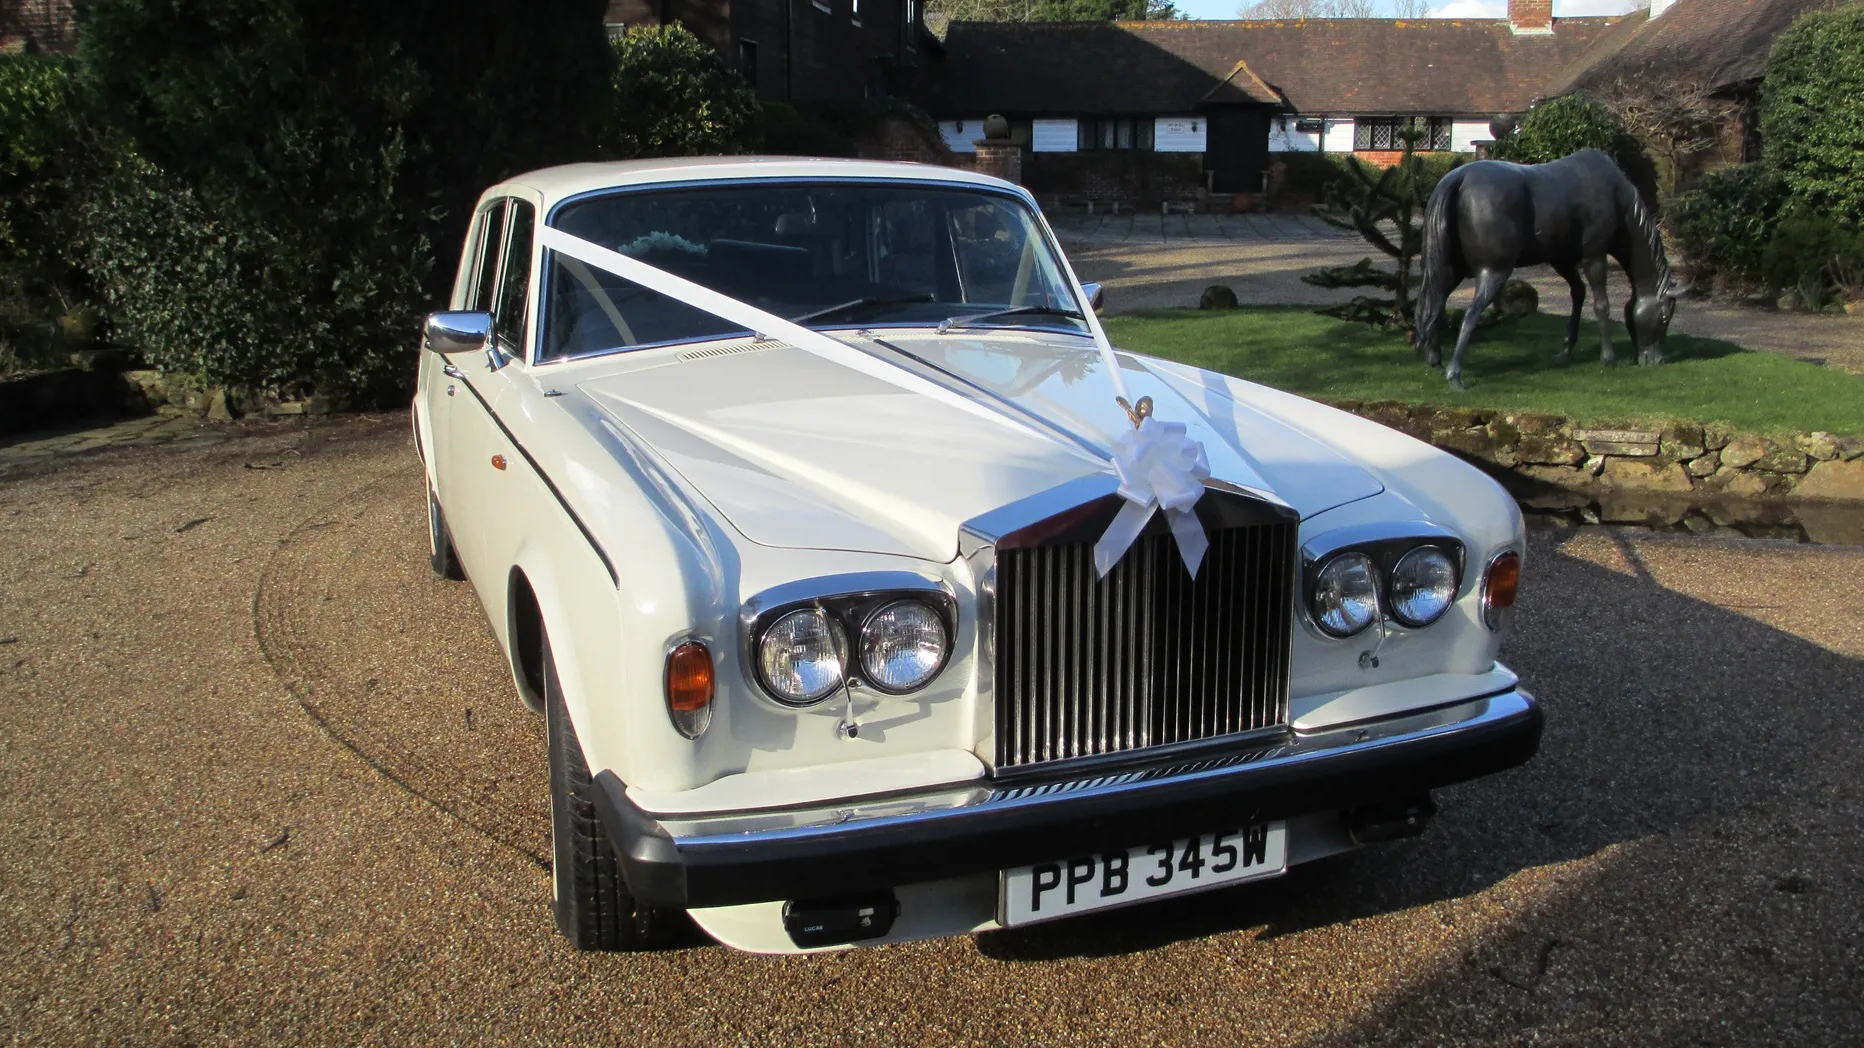 Classic Rolls- Royce Silver Shadown in white decorated with ribbons parked in front of a local Bude wedding venue.